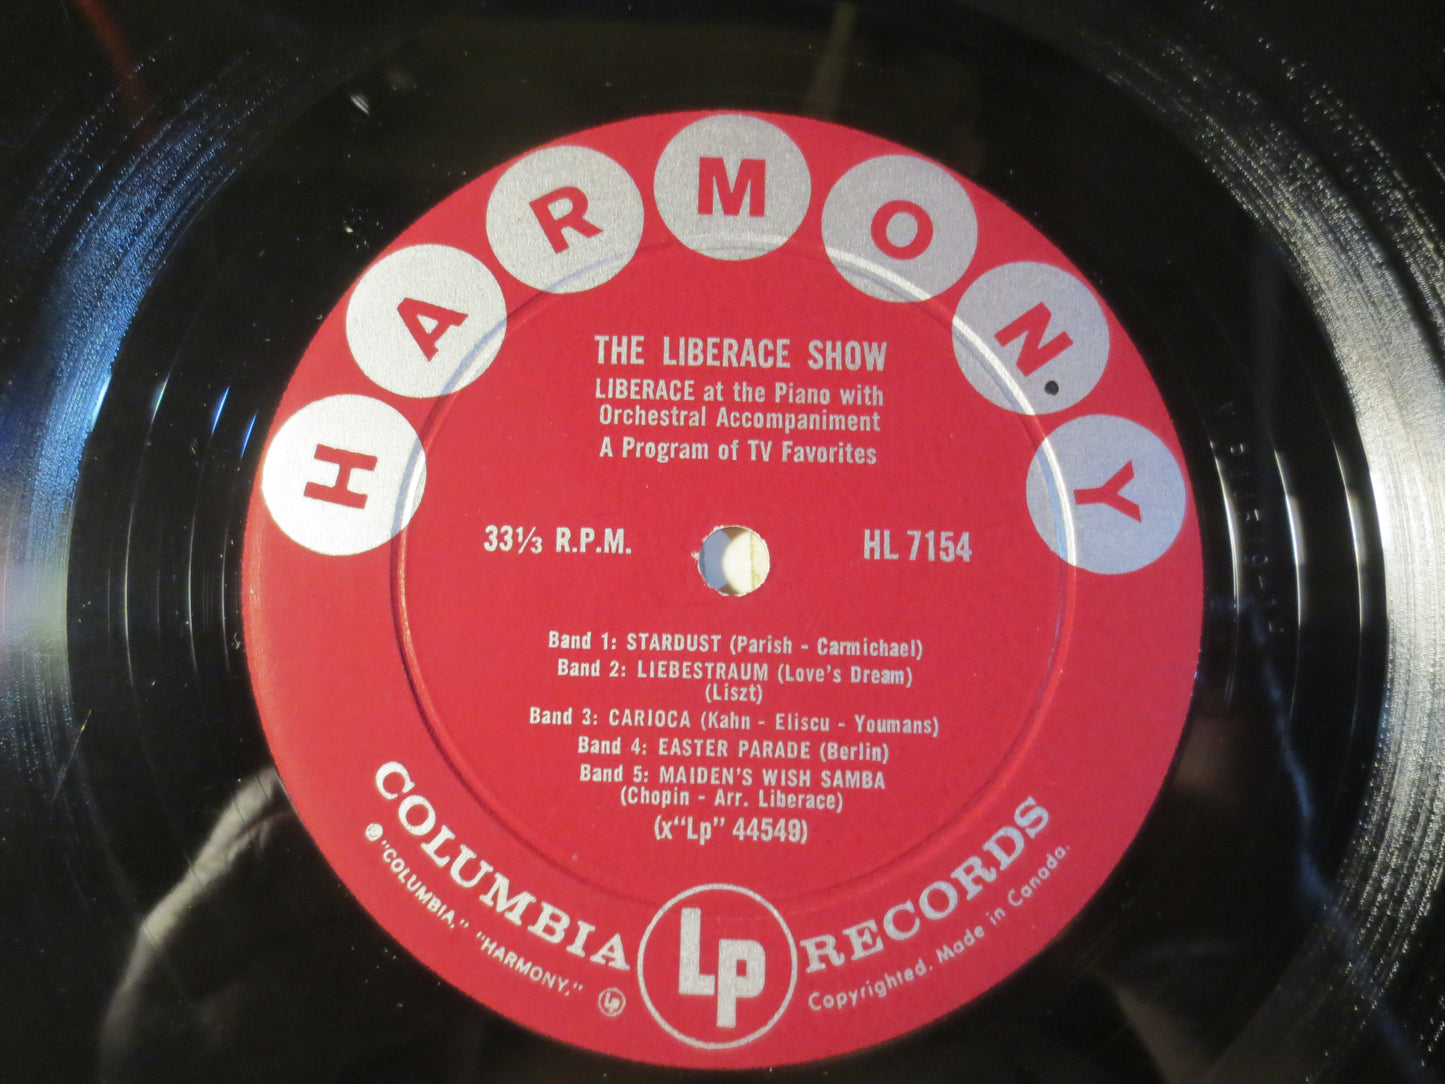 LIBERACE Records, The Liberace Show, Liberace Albums, Liberace Vinyl, Liberace Lp, Jazz Record, Vinyl Albums, 1958 Records